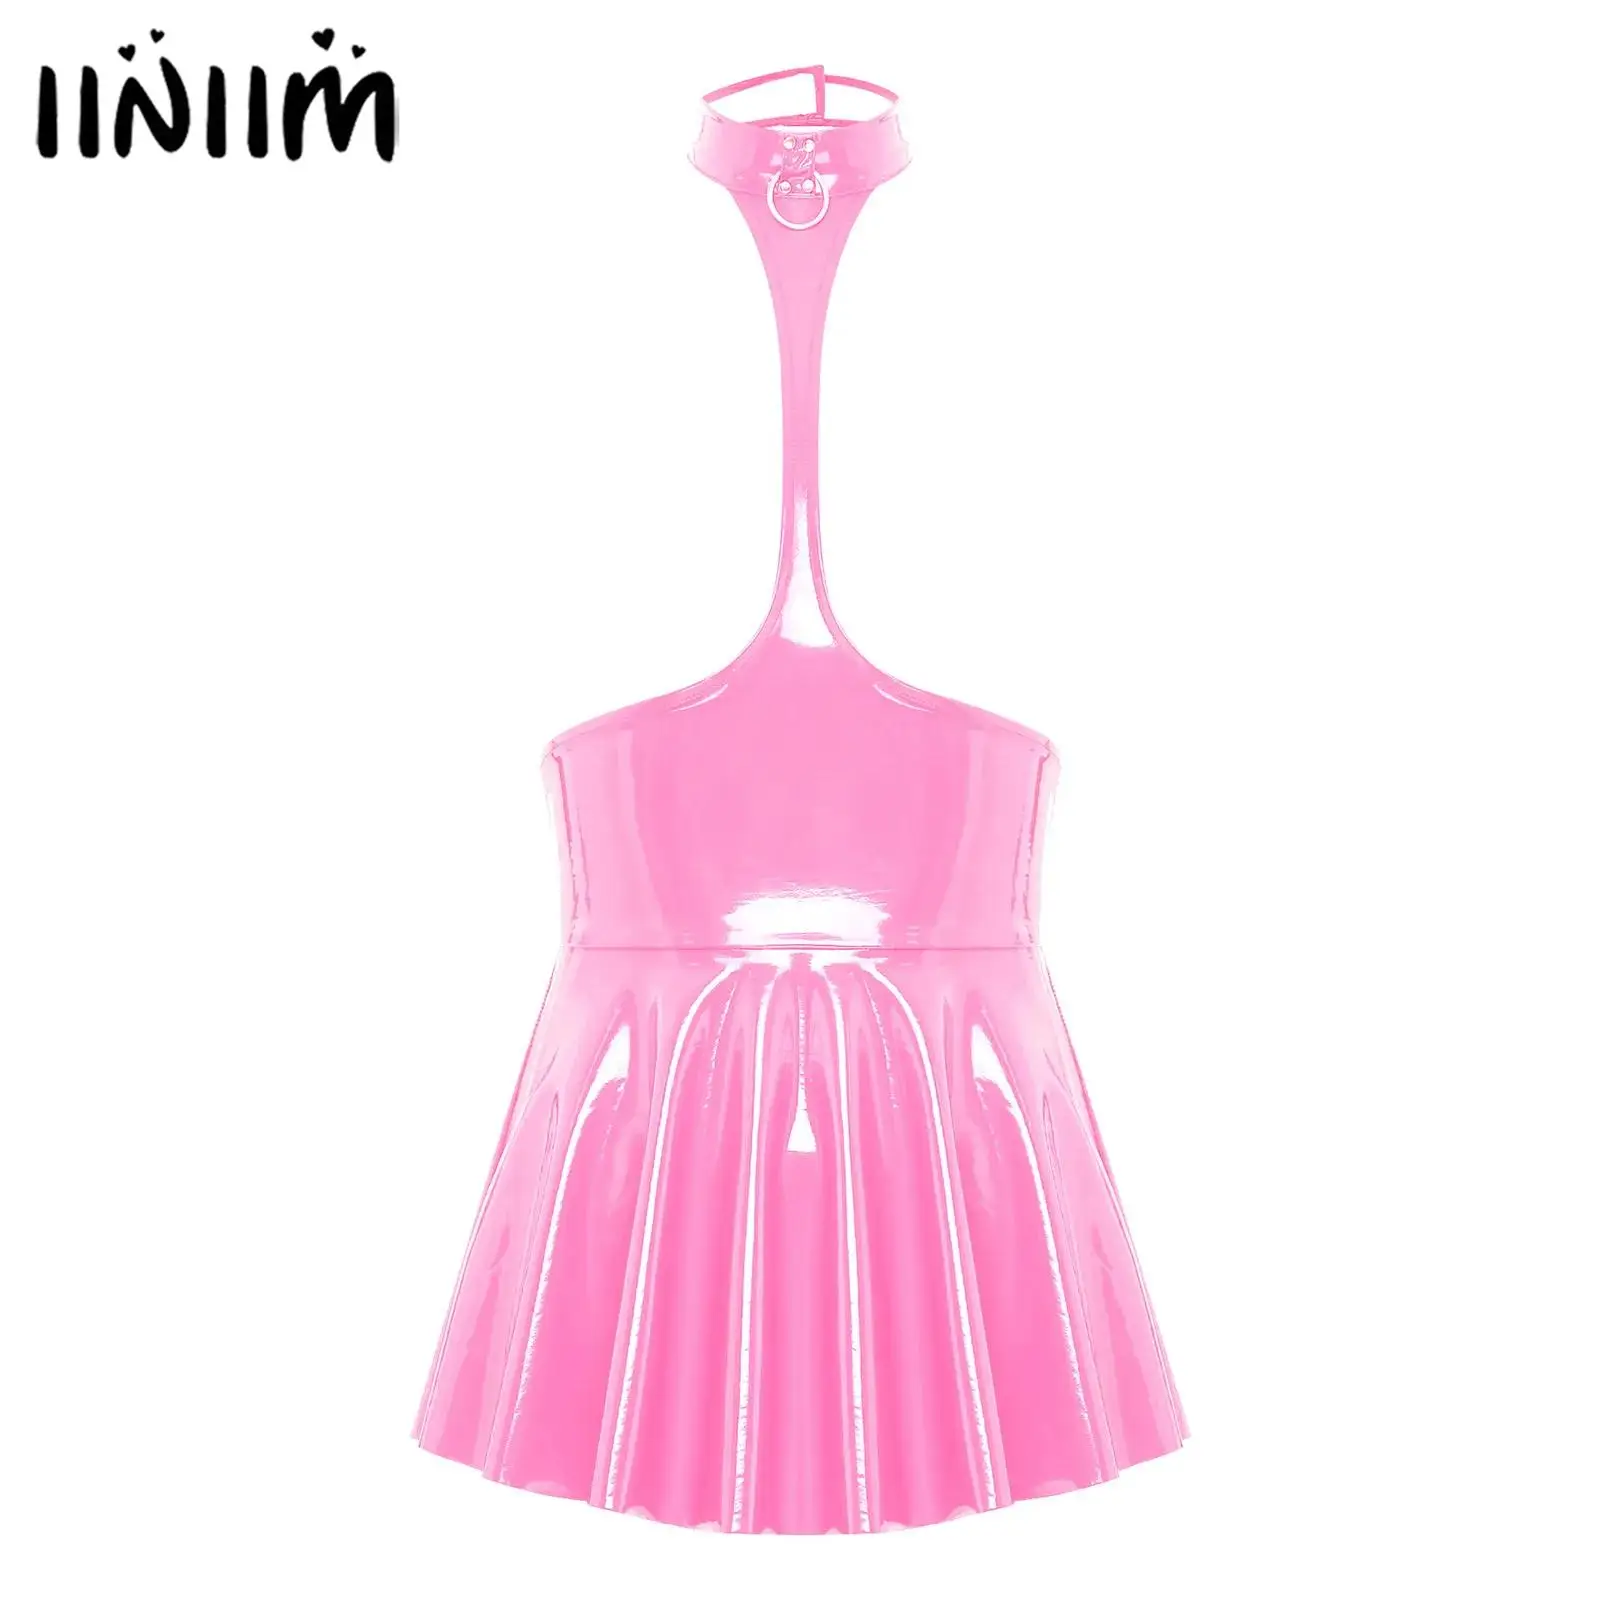 

Womens Halter Sexy Club Latex Dress with 2 Press Buttons Open Chest Halter Ruffled Wet Look Patent Leather Latex Dress Clubwear